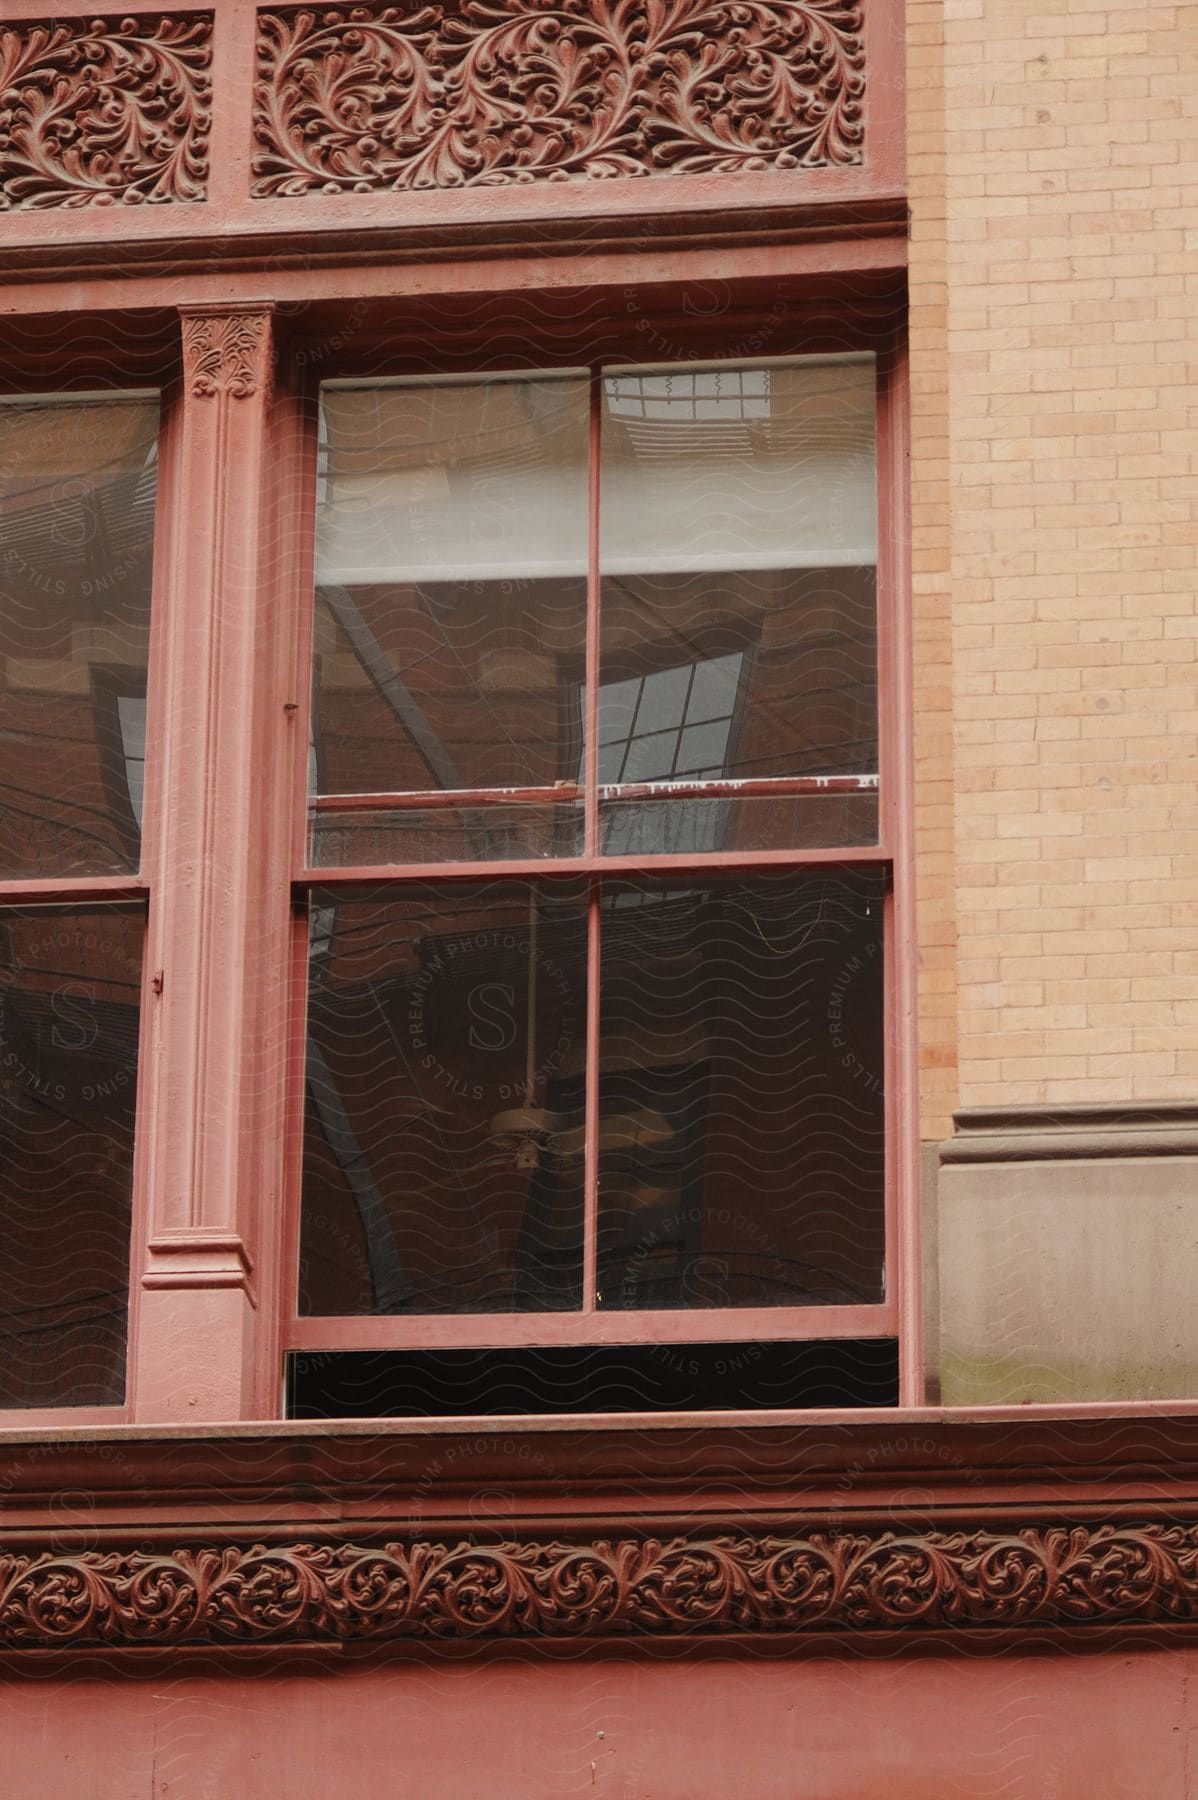 An old window of a building is shown with the window slightly ajar